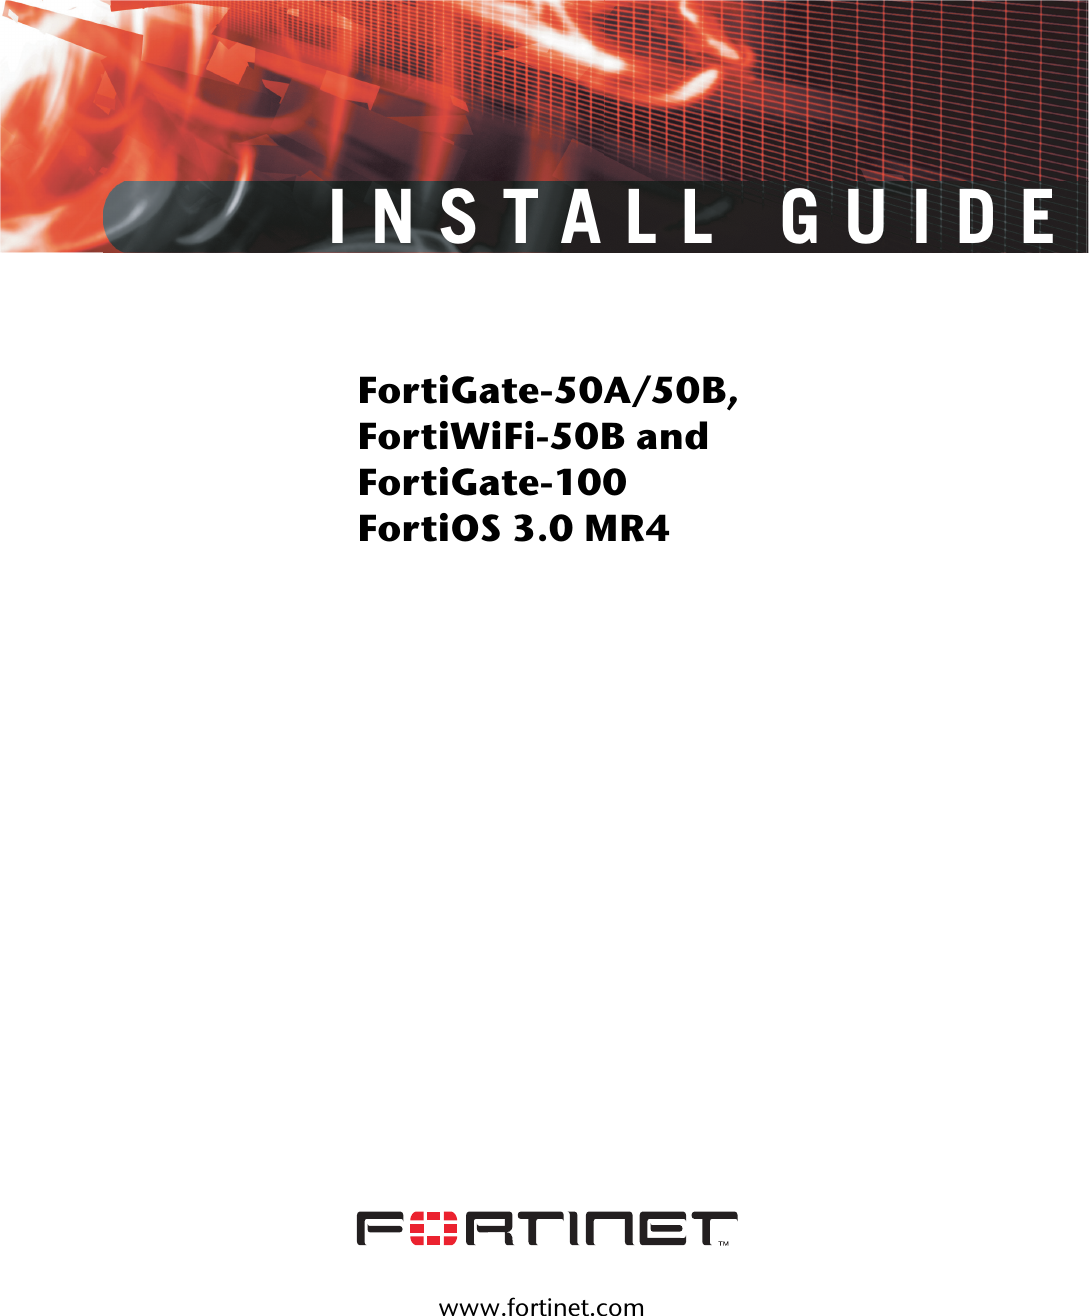 www.fortinet.comFortiGate-50A/50B, FortiWiFi-50B and FortiGate-100FortiOS 3.0 MR4INSTALL GUIDE